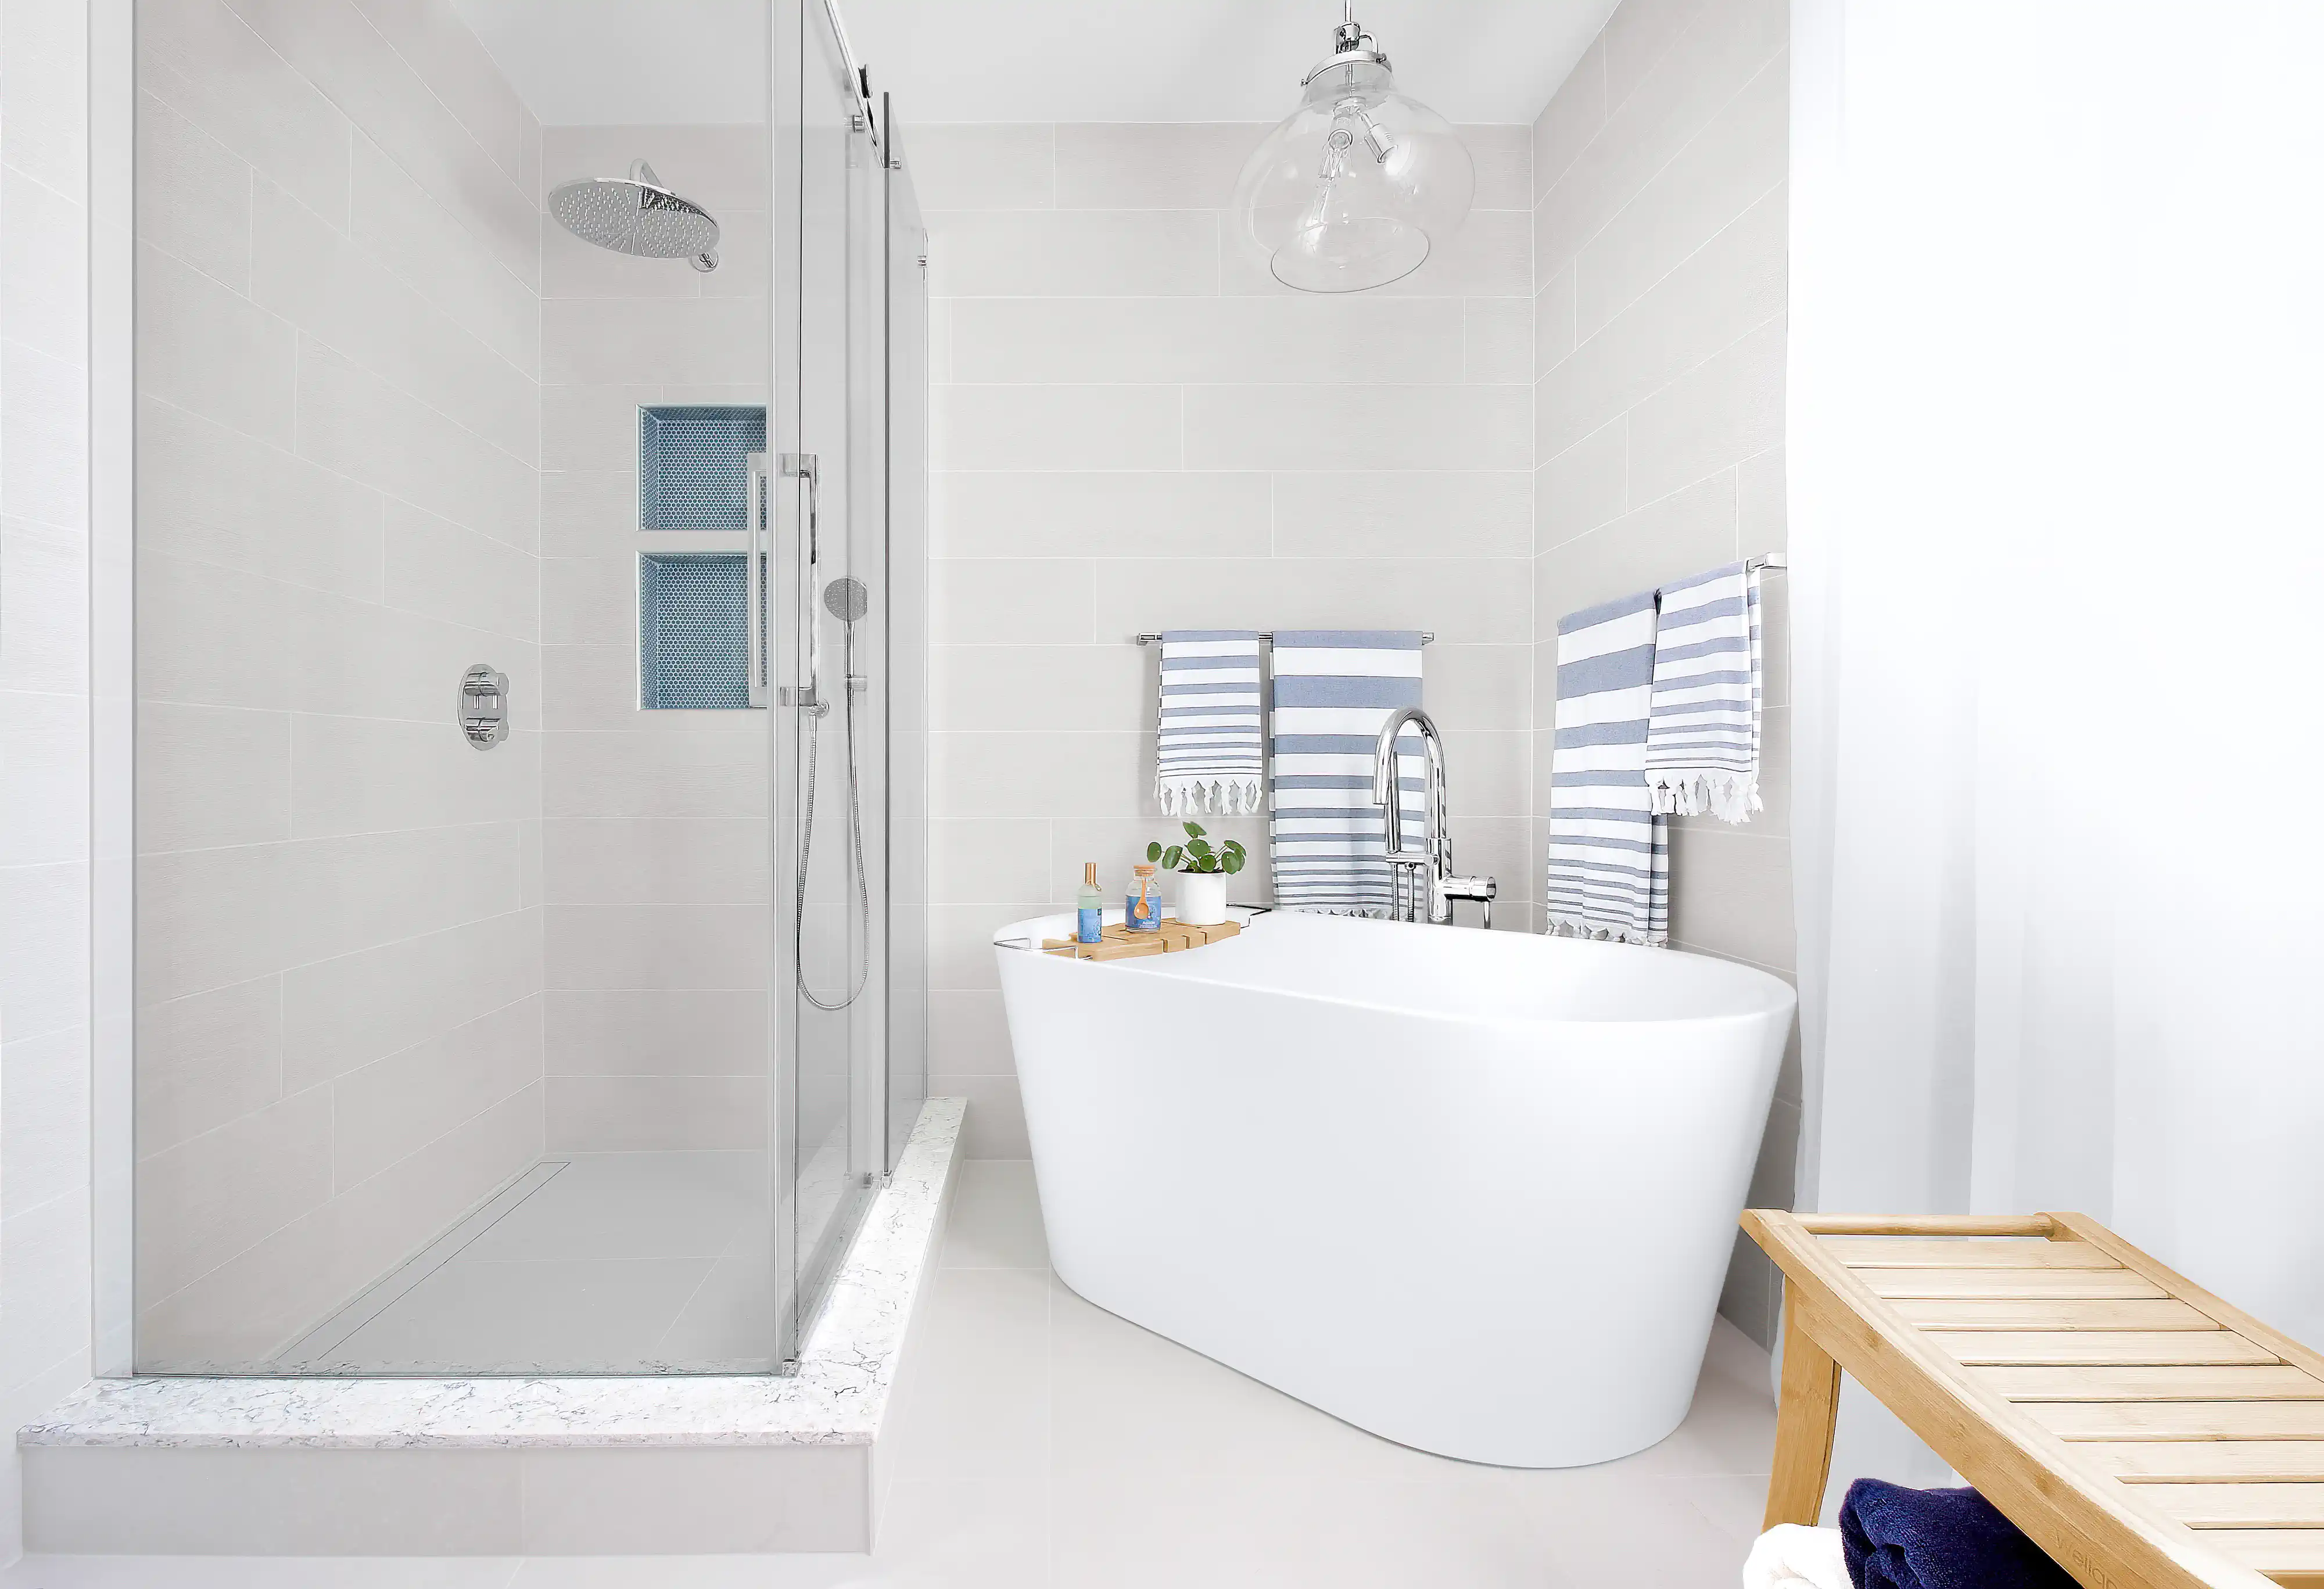 A modern bathroom with a white freestanding bathtub and a glass shower, interior by Sarah Brown Design